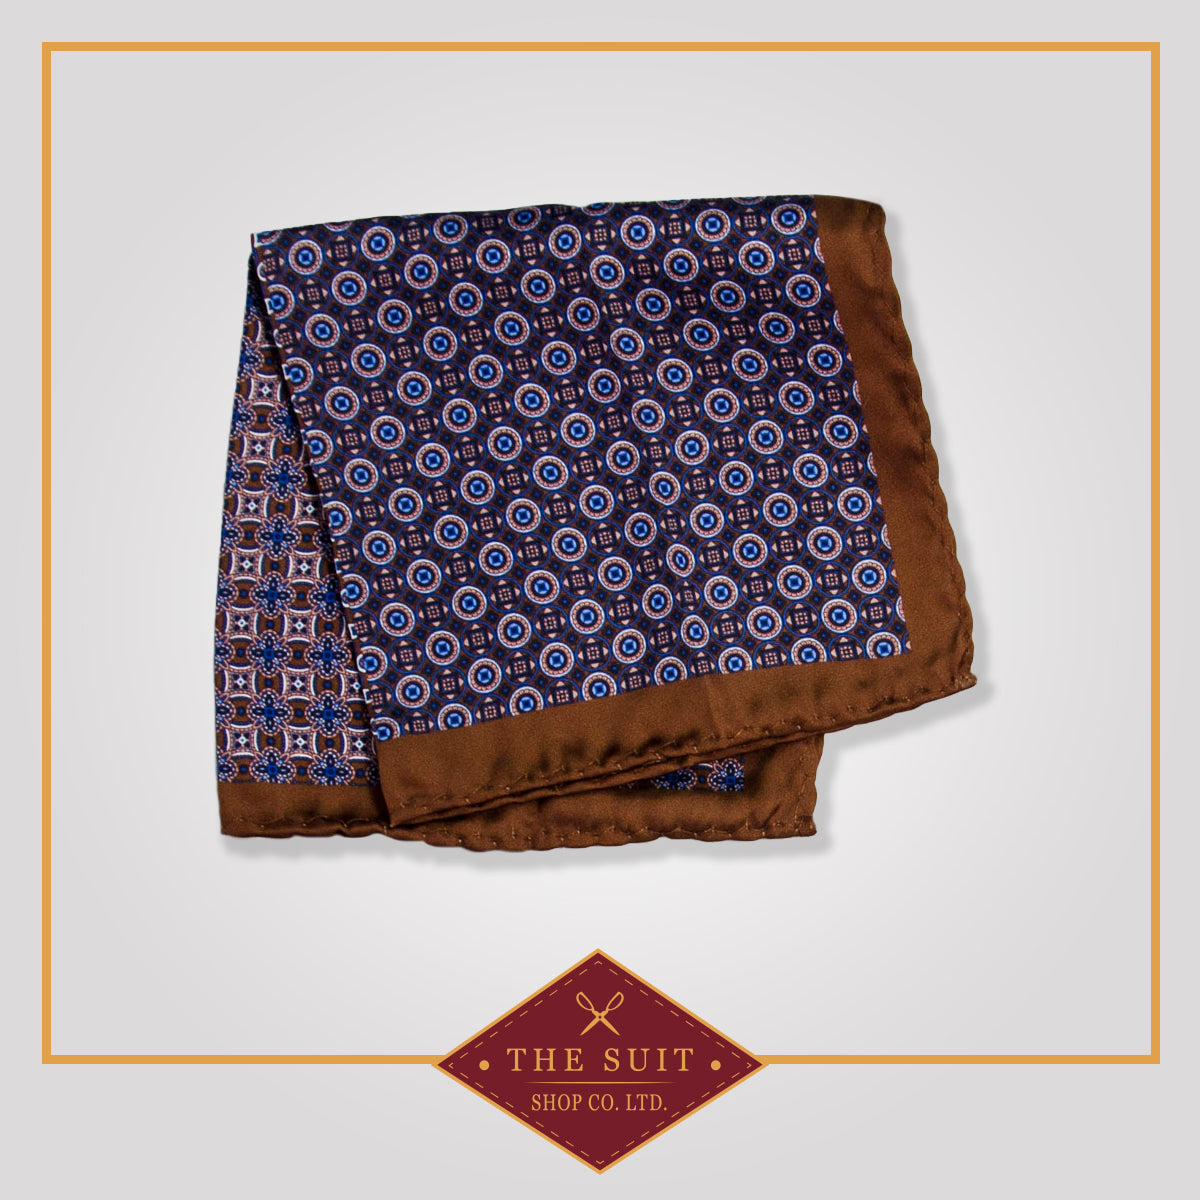 Sepia and Matterhorn Patterned Pocket Square